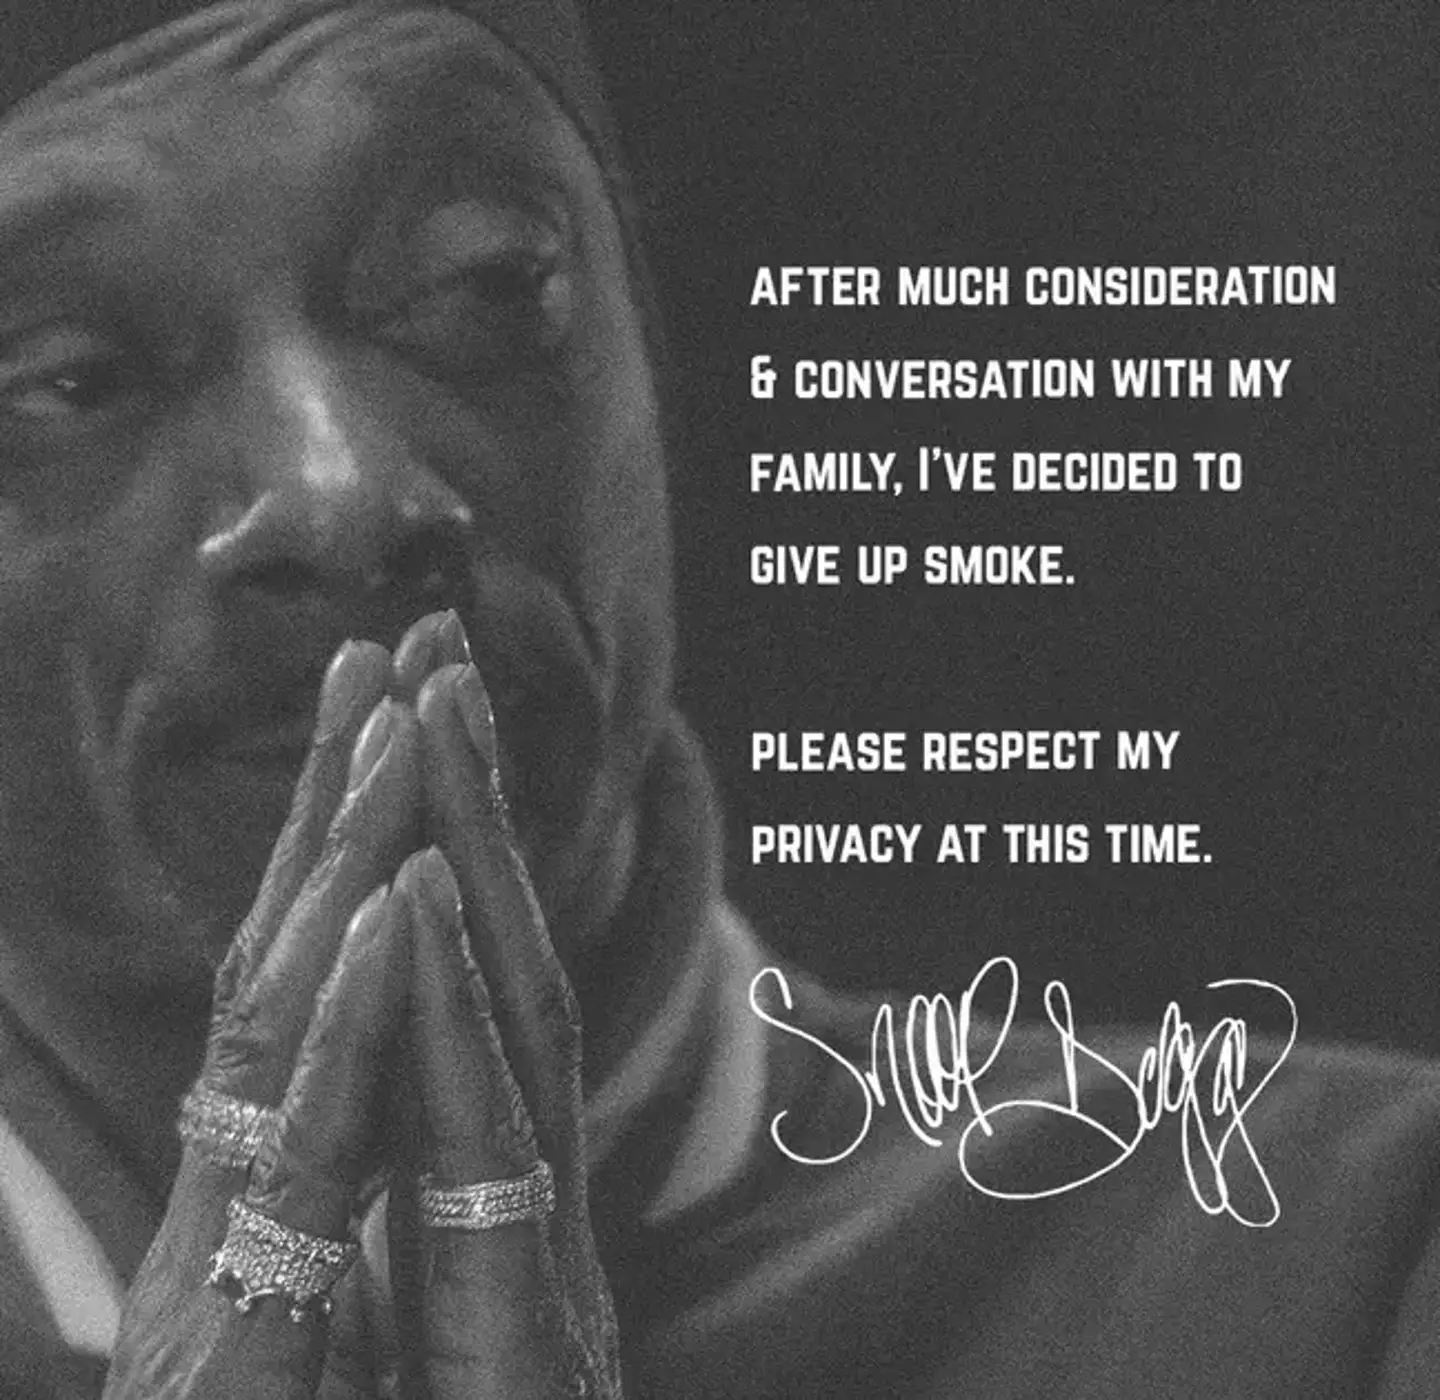 Snoop Dogg made the shock announcement that he is 'giving up smoke' for family reasons.